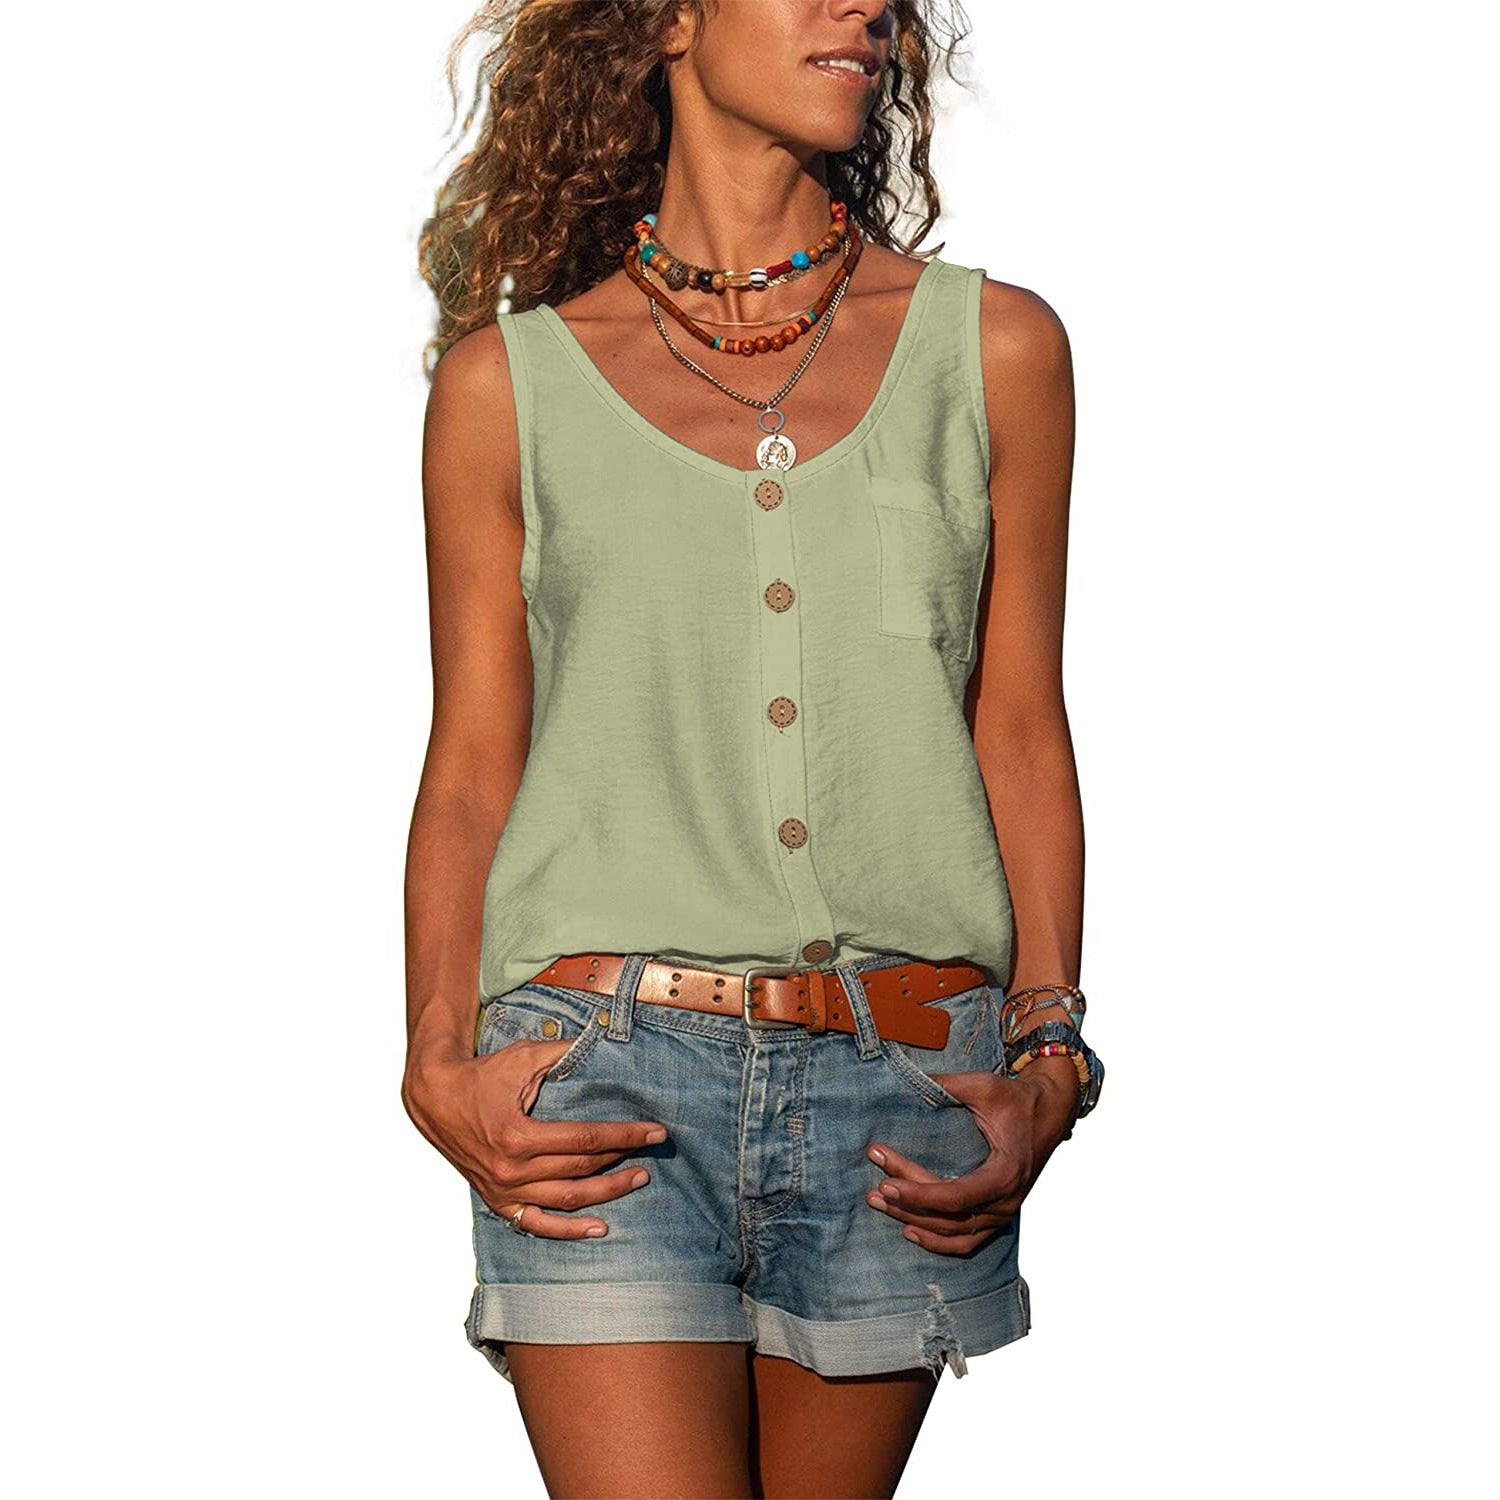 Summer New Solid Color U-neck Vest Button Sleeveless Tank Top with Pocket Ladies Casual T-shirt